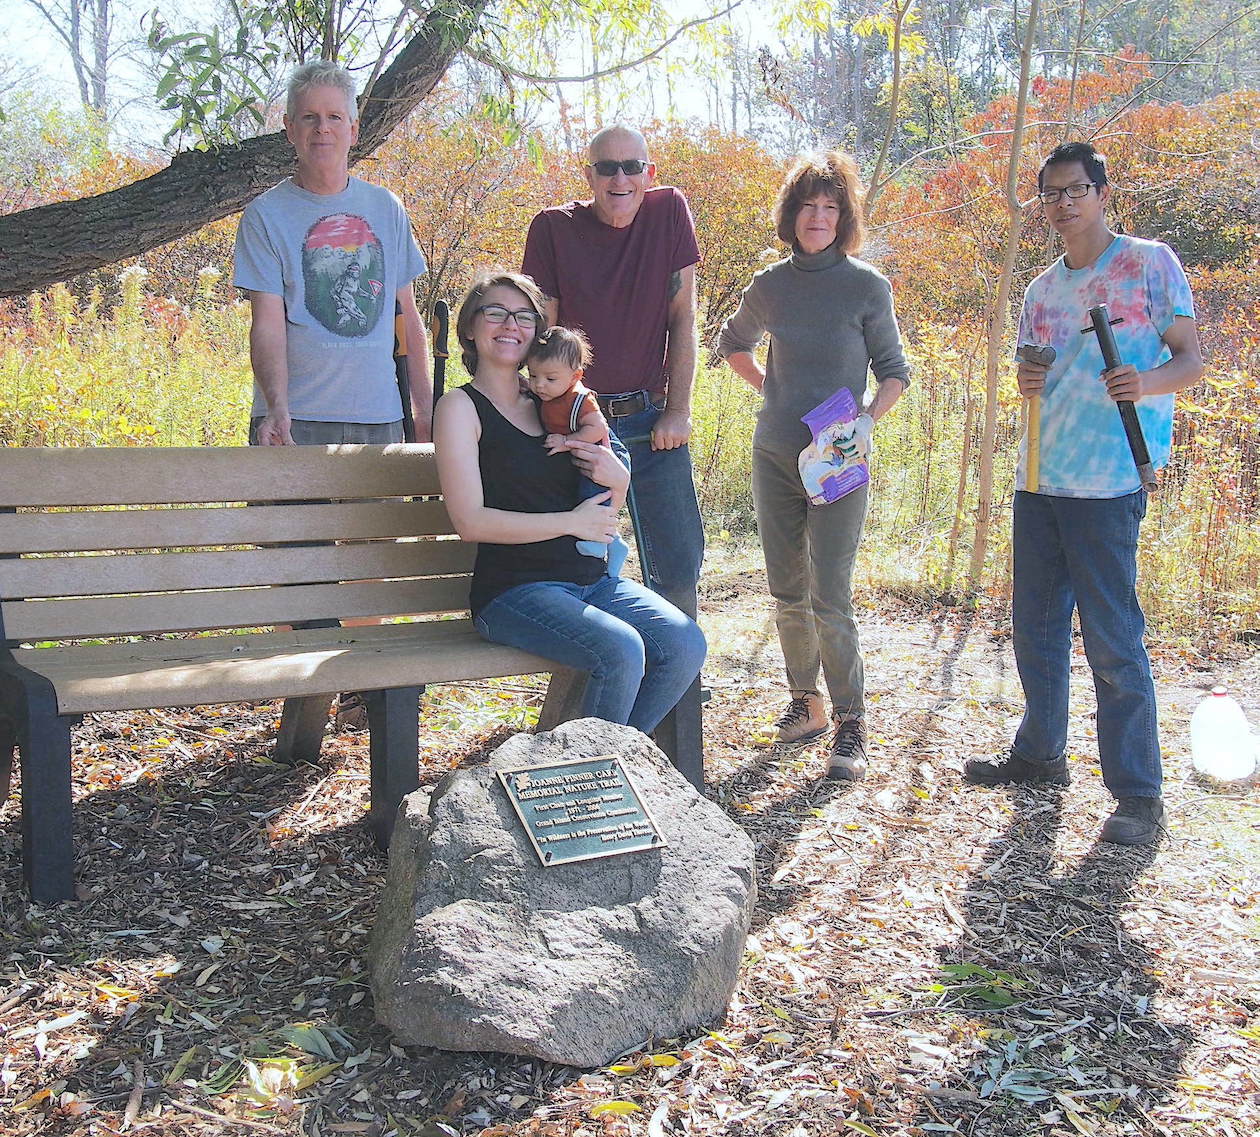 Standing from left: Tim Carr, Tom Burke, Karen Carr Keefe and Nathan Keefe. Seated on the bench: Chelsea Carr and her infant son.